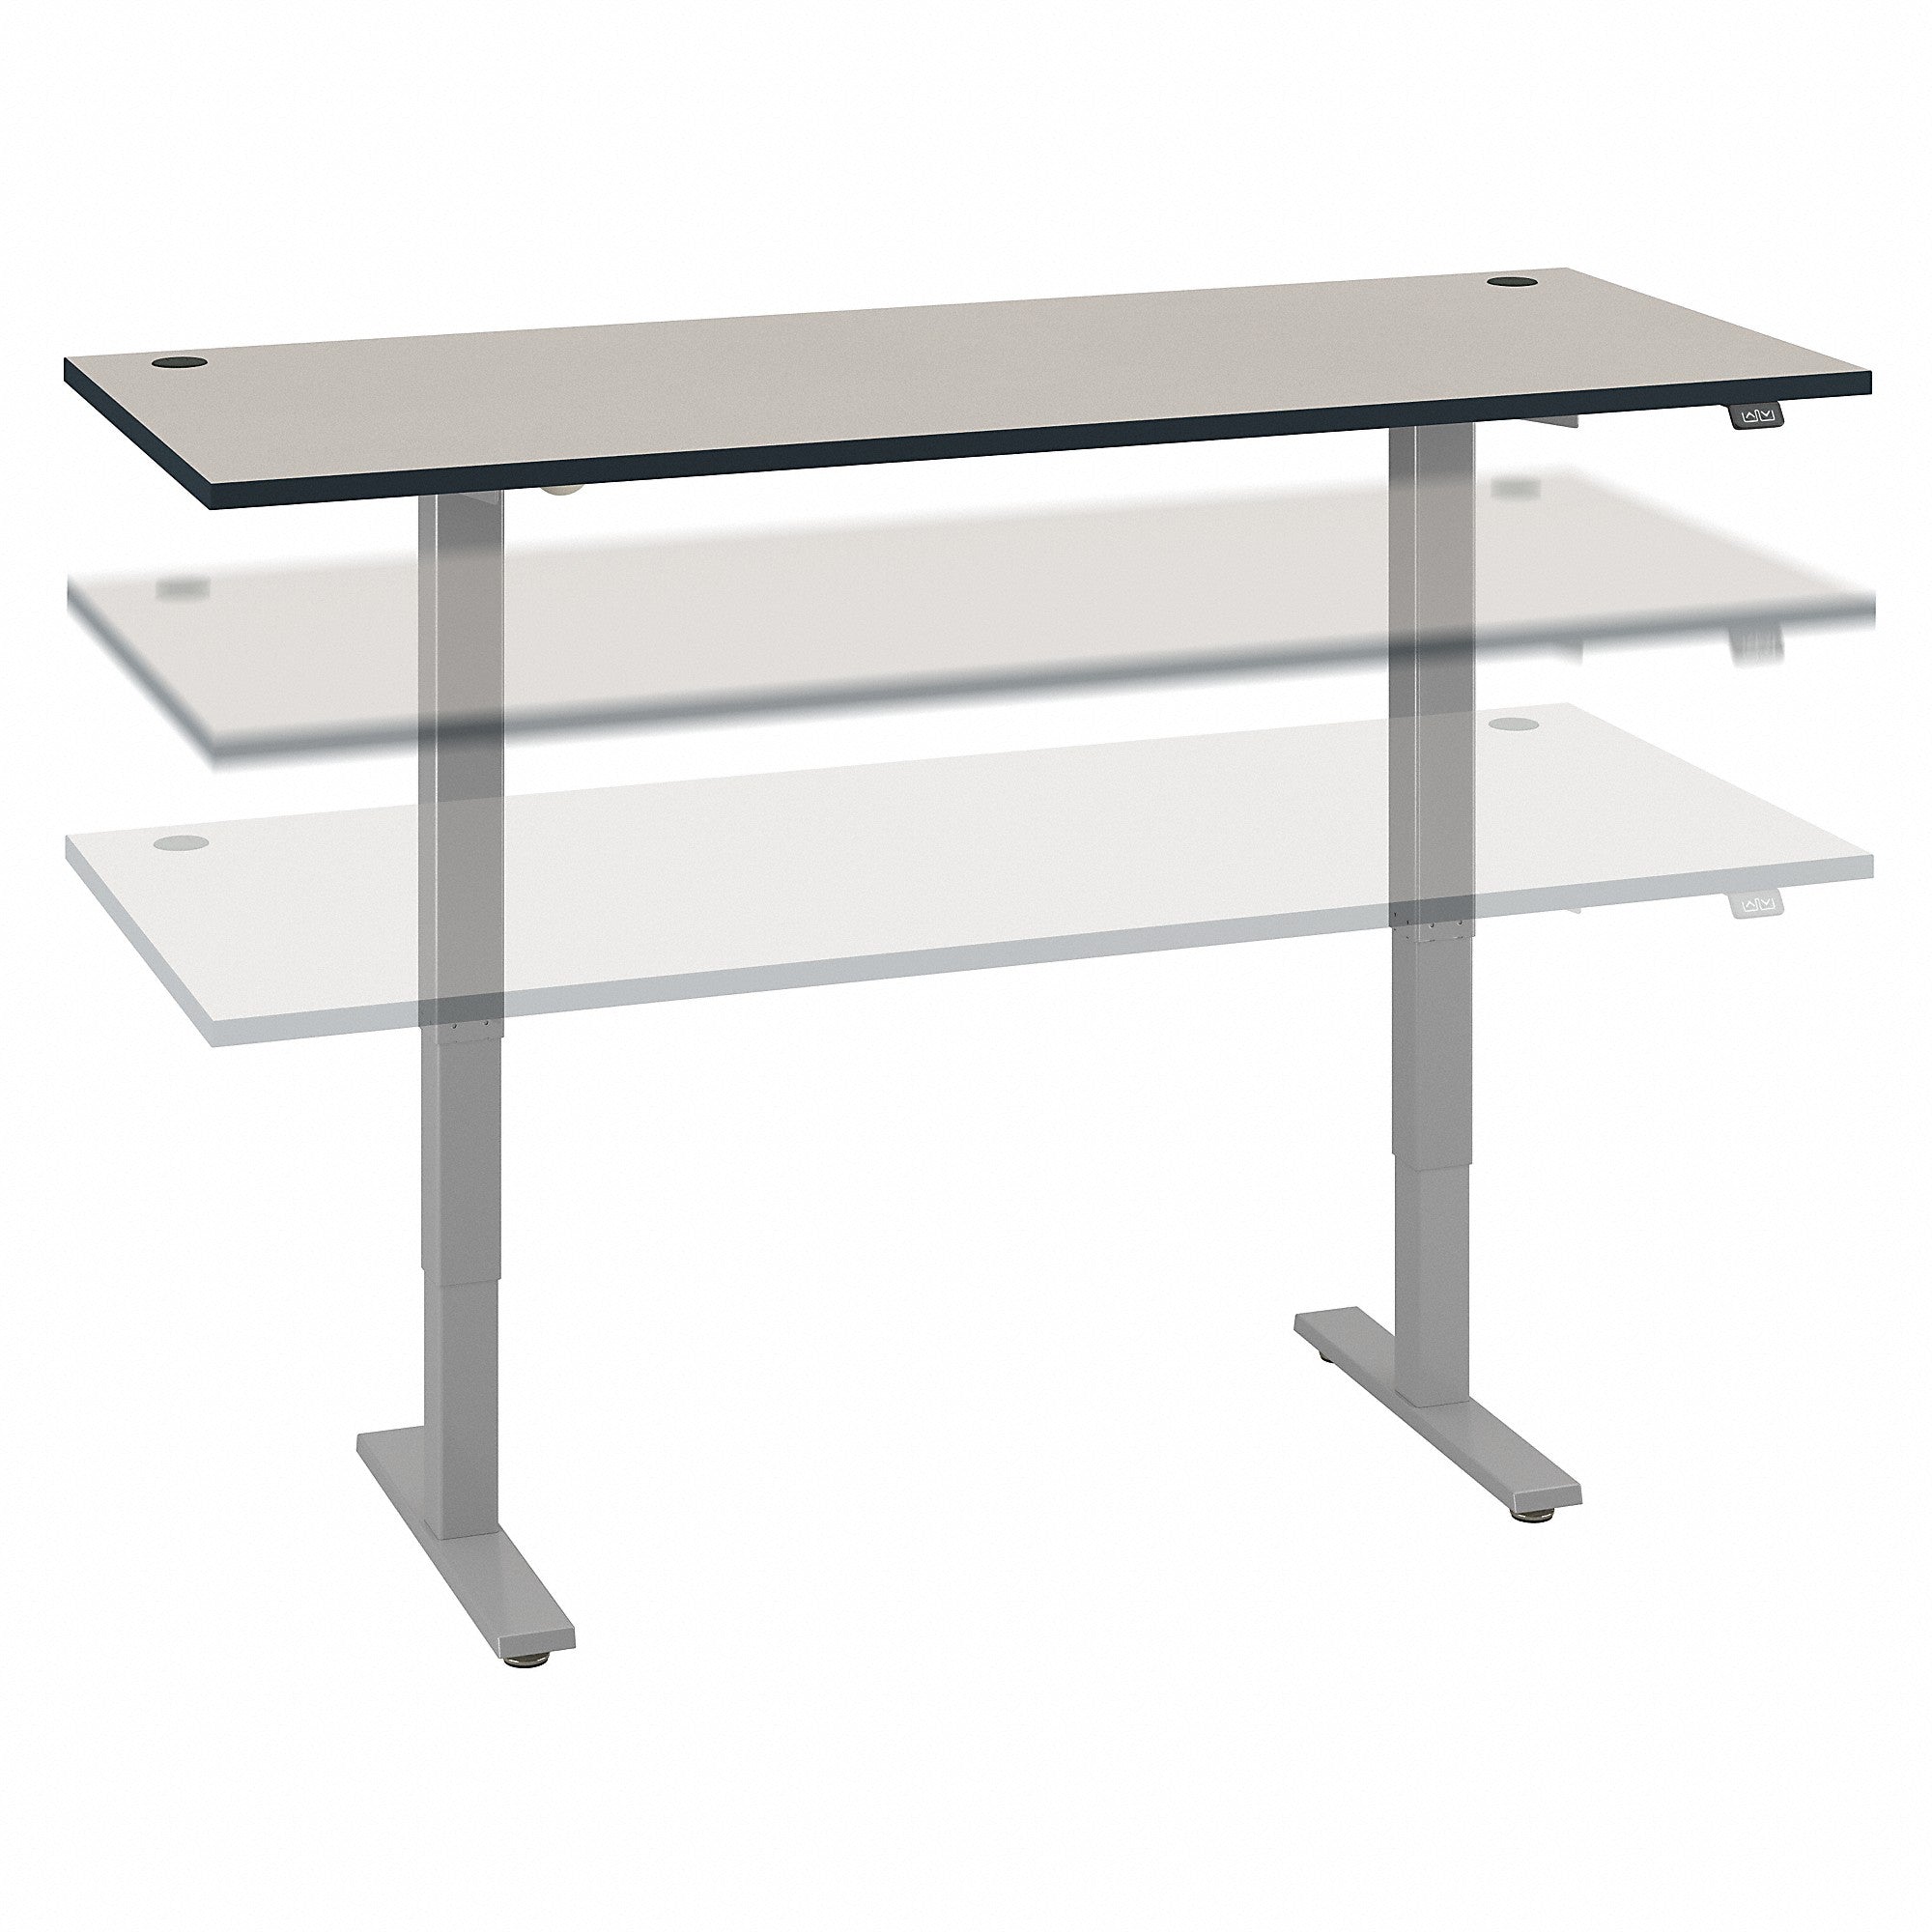 Bush Business Furniture Move 40 Series 72W x 30D Height Adjustable Standing Desk| White